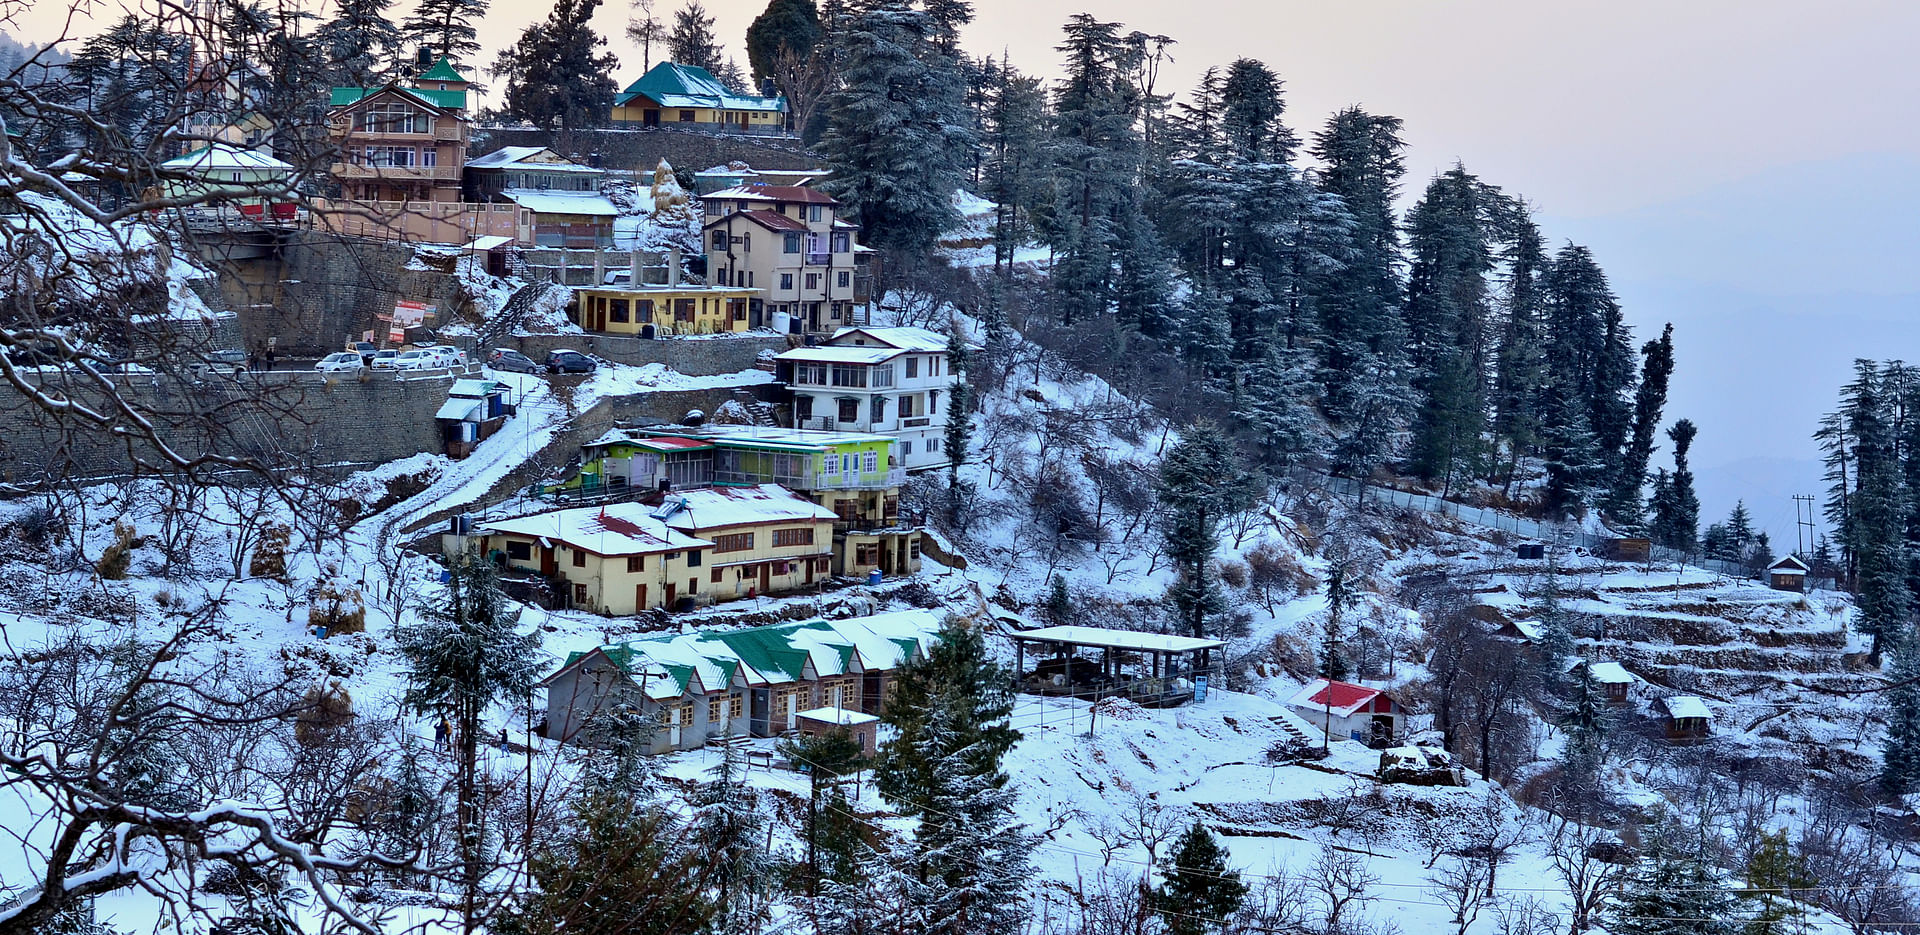 What are some good places to go shopping for clothes in Shimla and Manali  if you're visiting from Delhi? - Quora